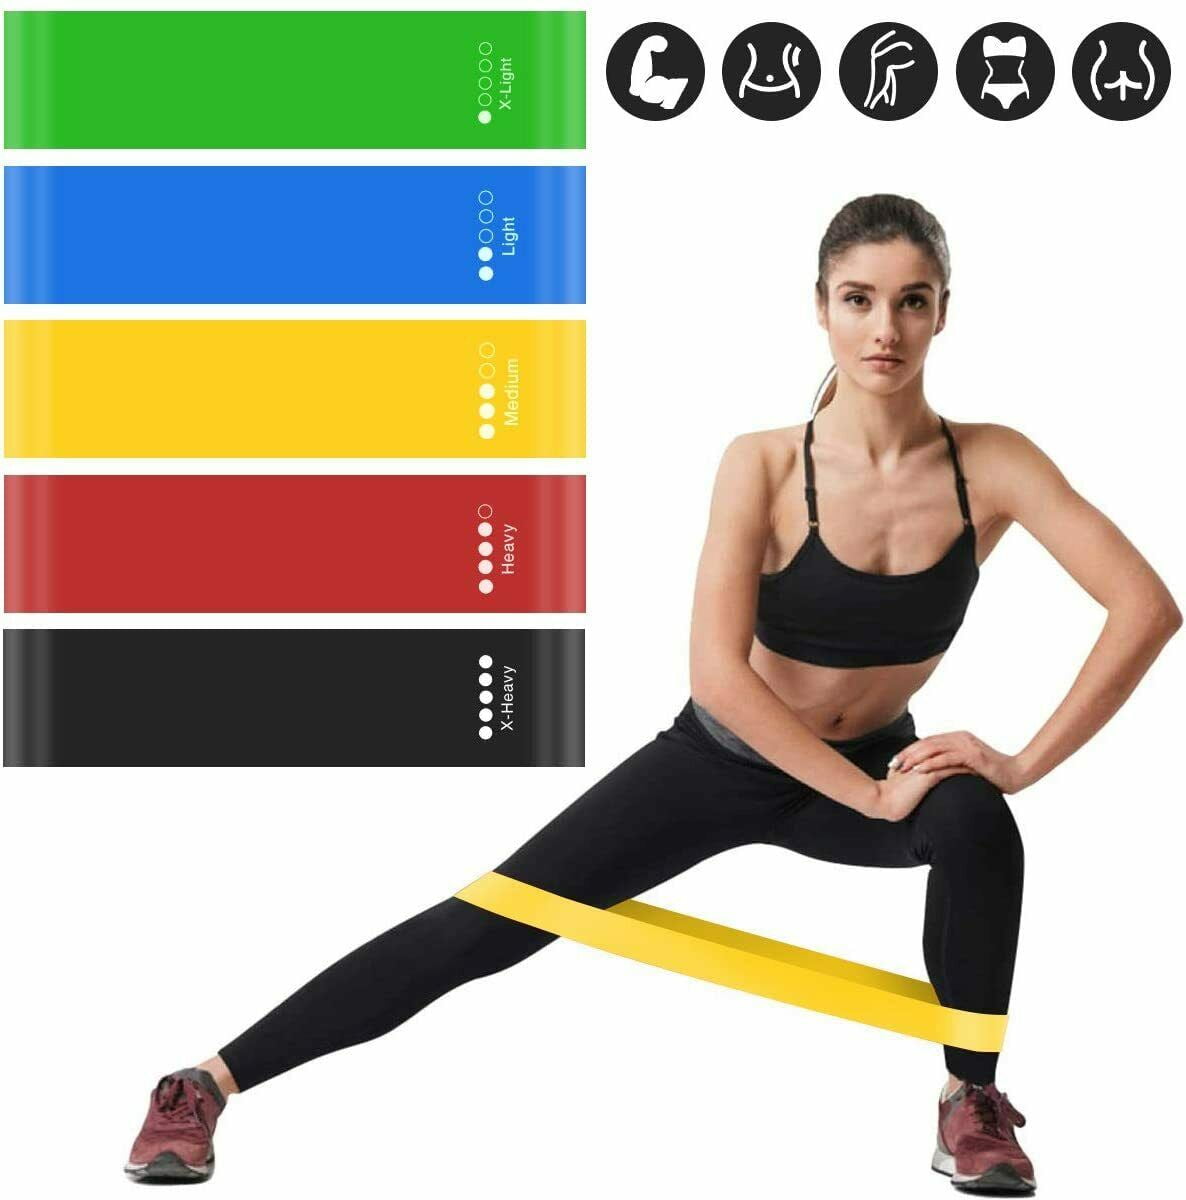 DYNA-BAND Exercise Fitness Pilates Physio Stretch Band Lightweight/Green 